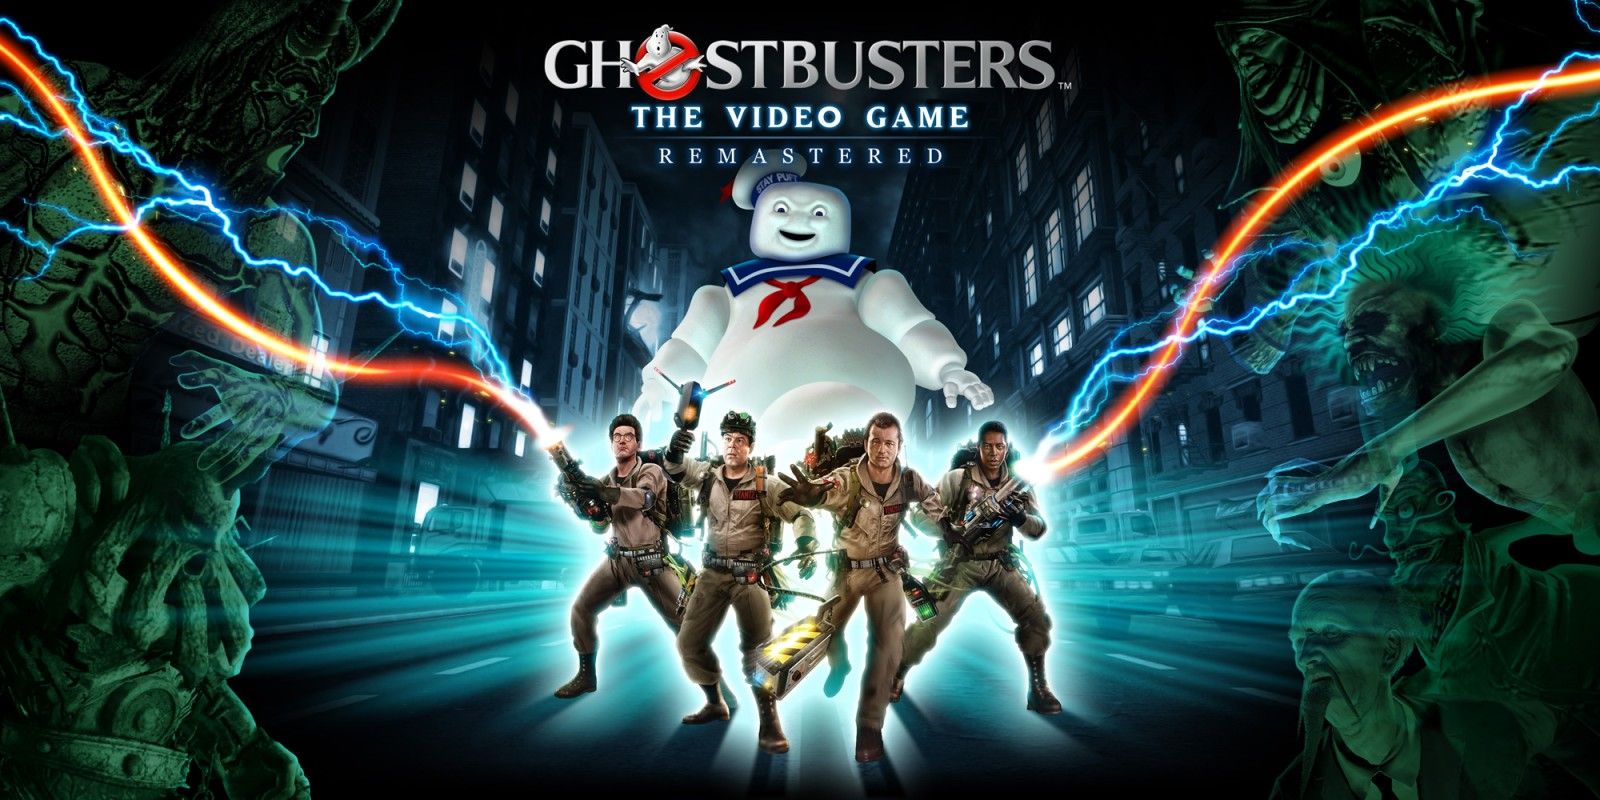 Ghostbusters The Video Game Remastered Title Banner - the four Ghostbusters standing in front of the Stay Puft Marshmallow Man